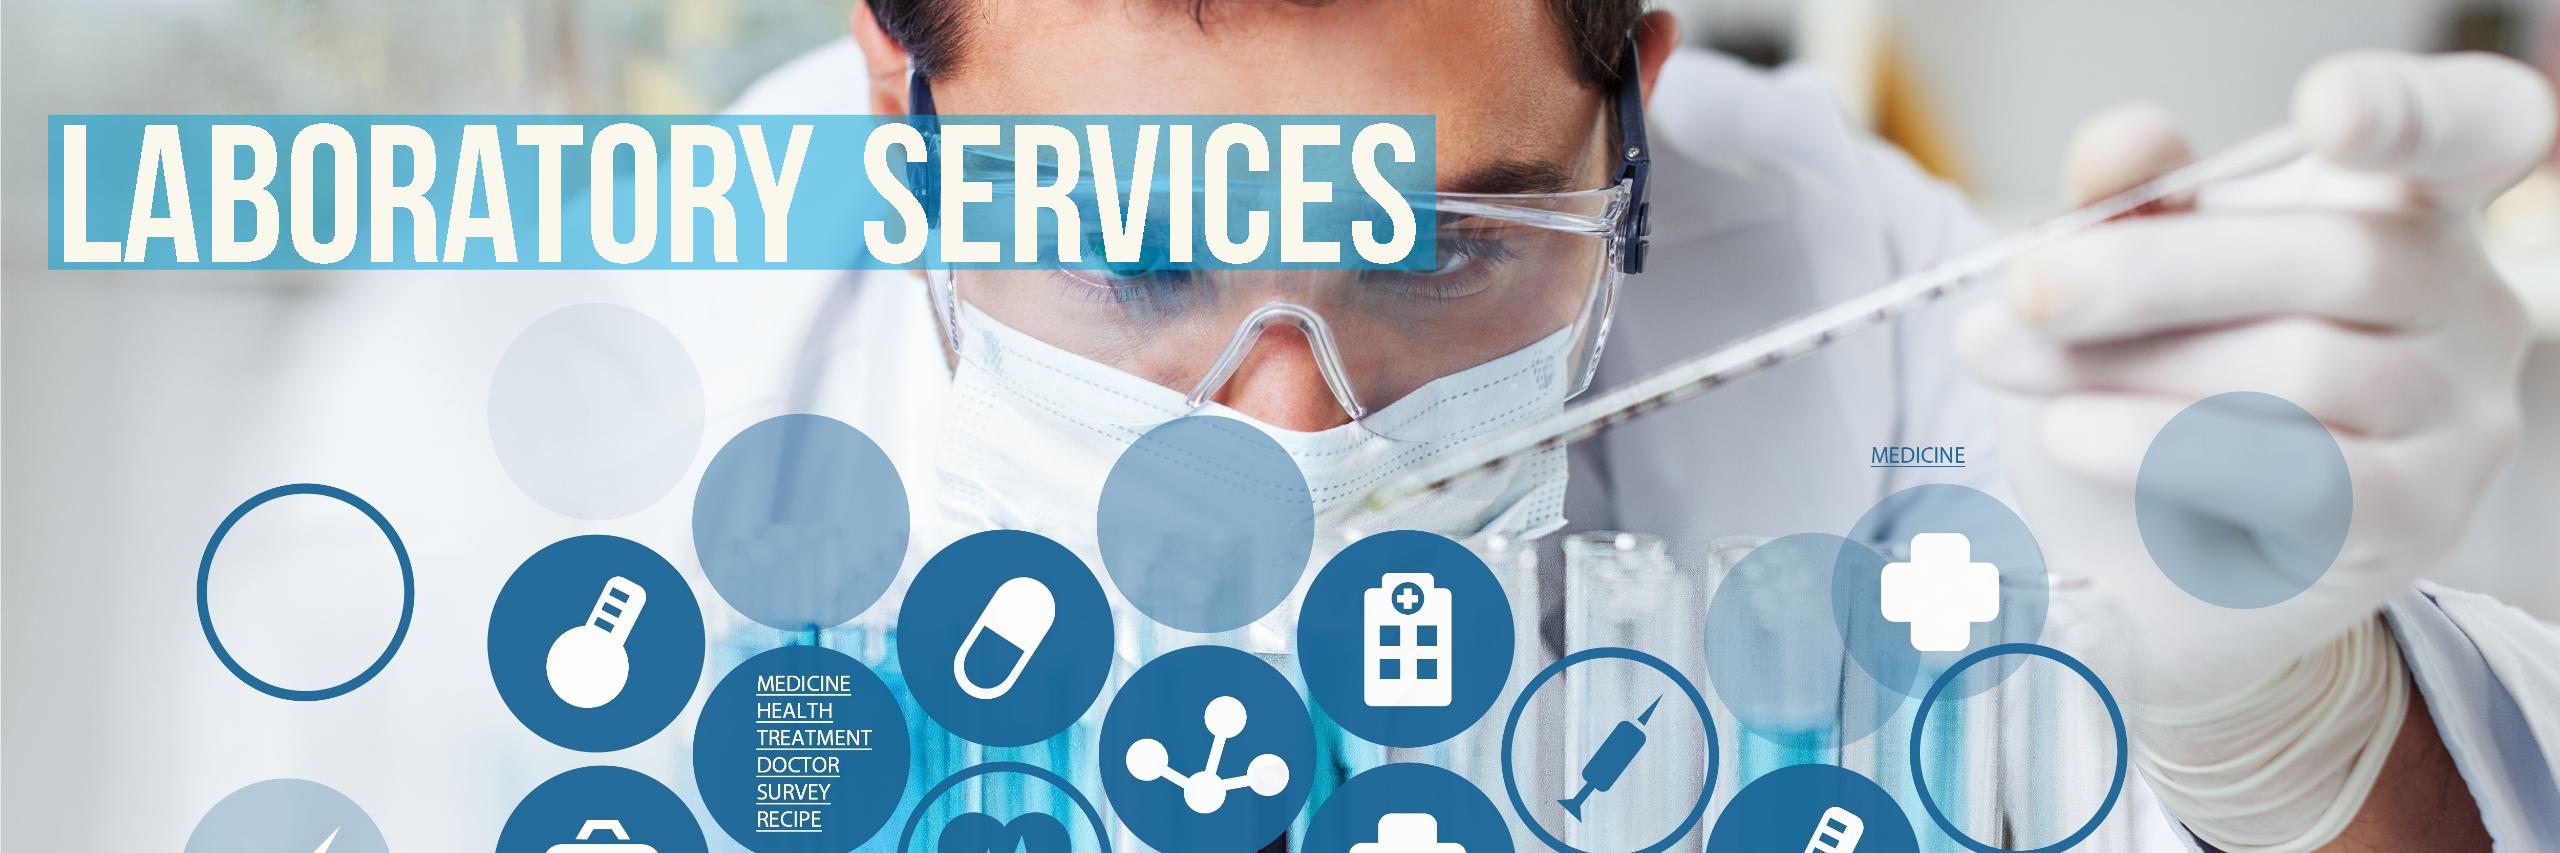 Laboratory Services Banner